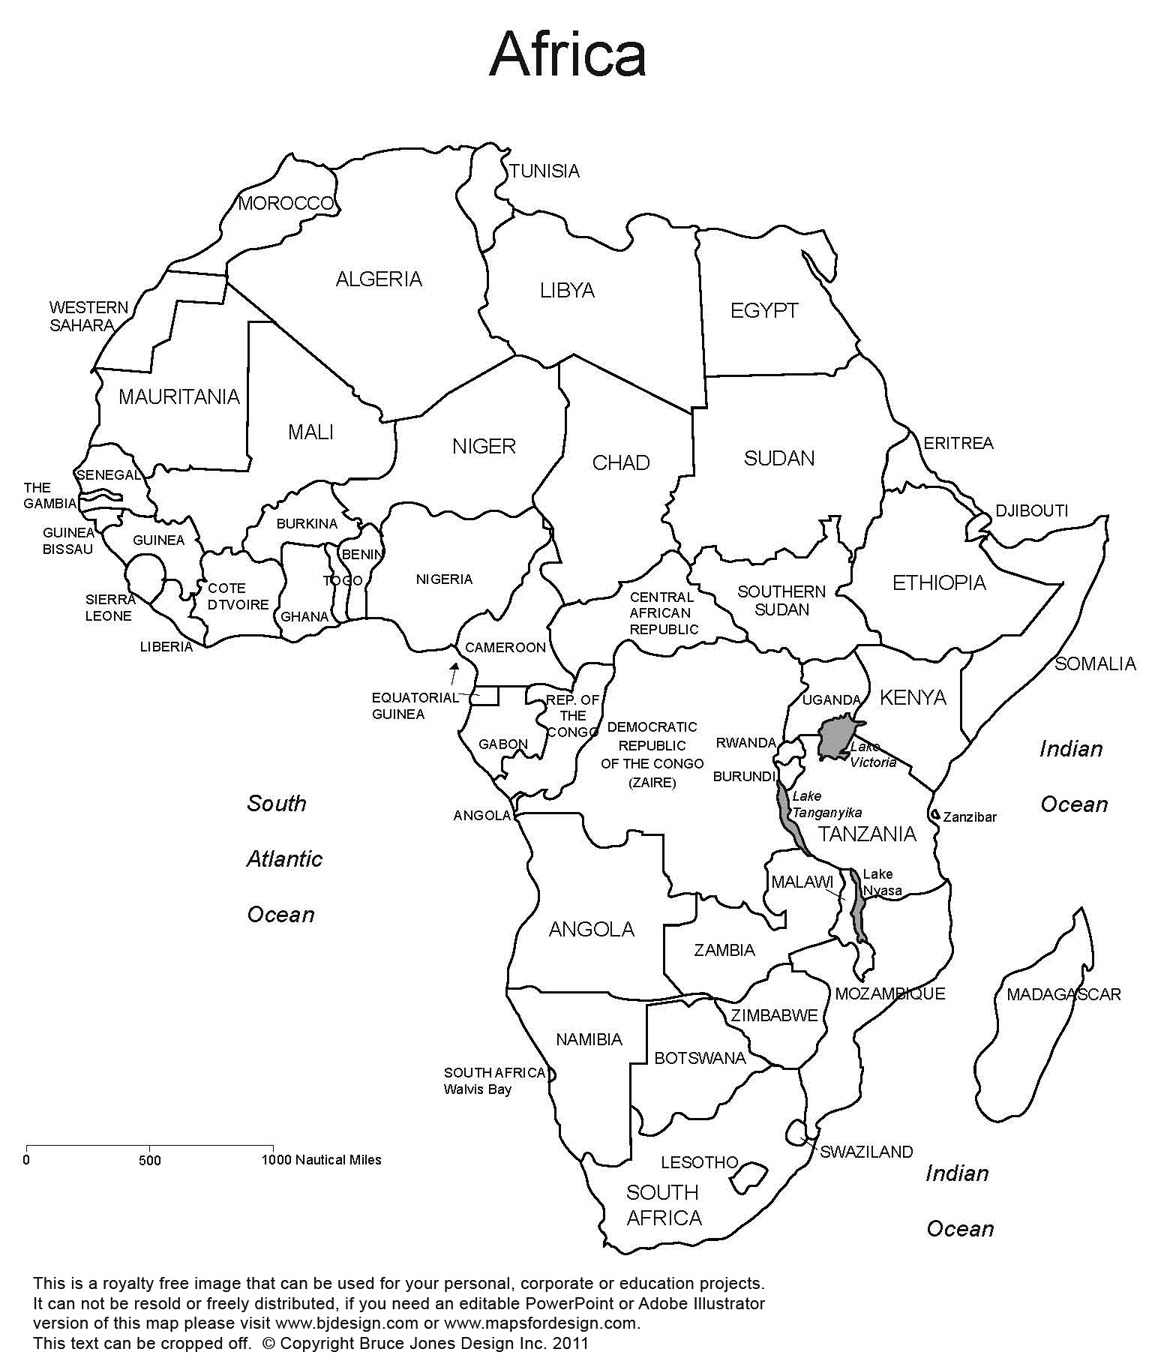 Countries Coloring Pages Printable Maps Of Africa With Countries Free Printable Coloring Pages